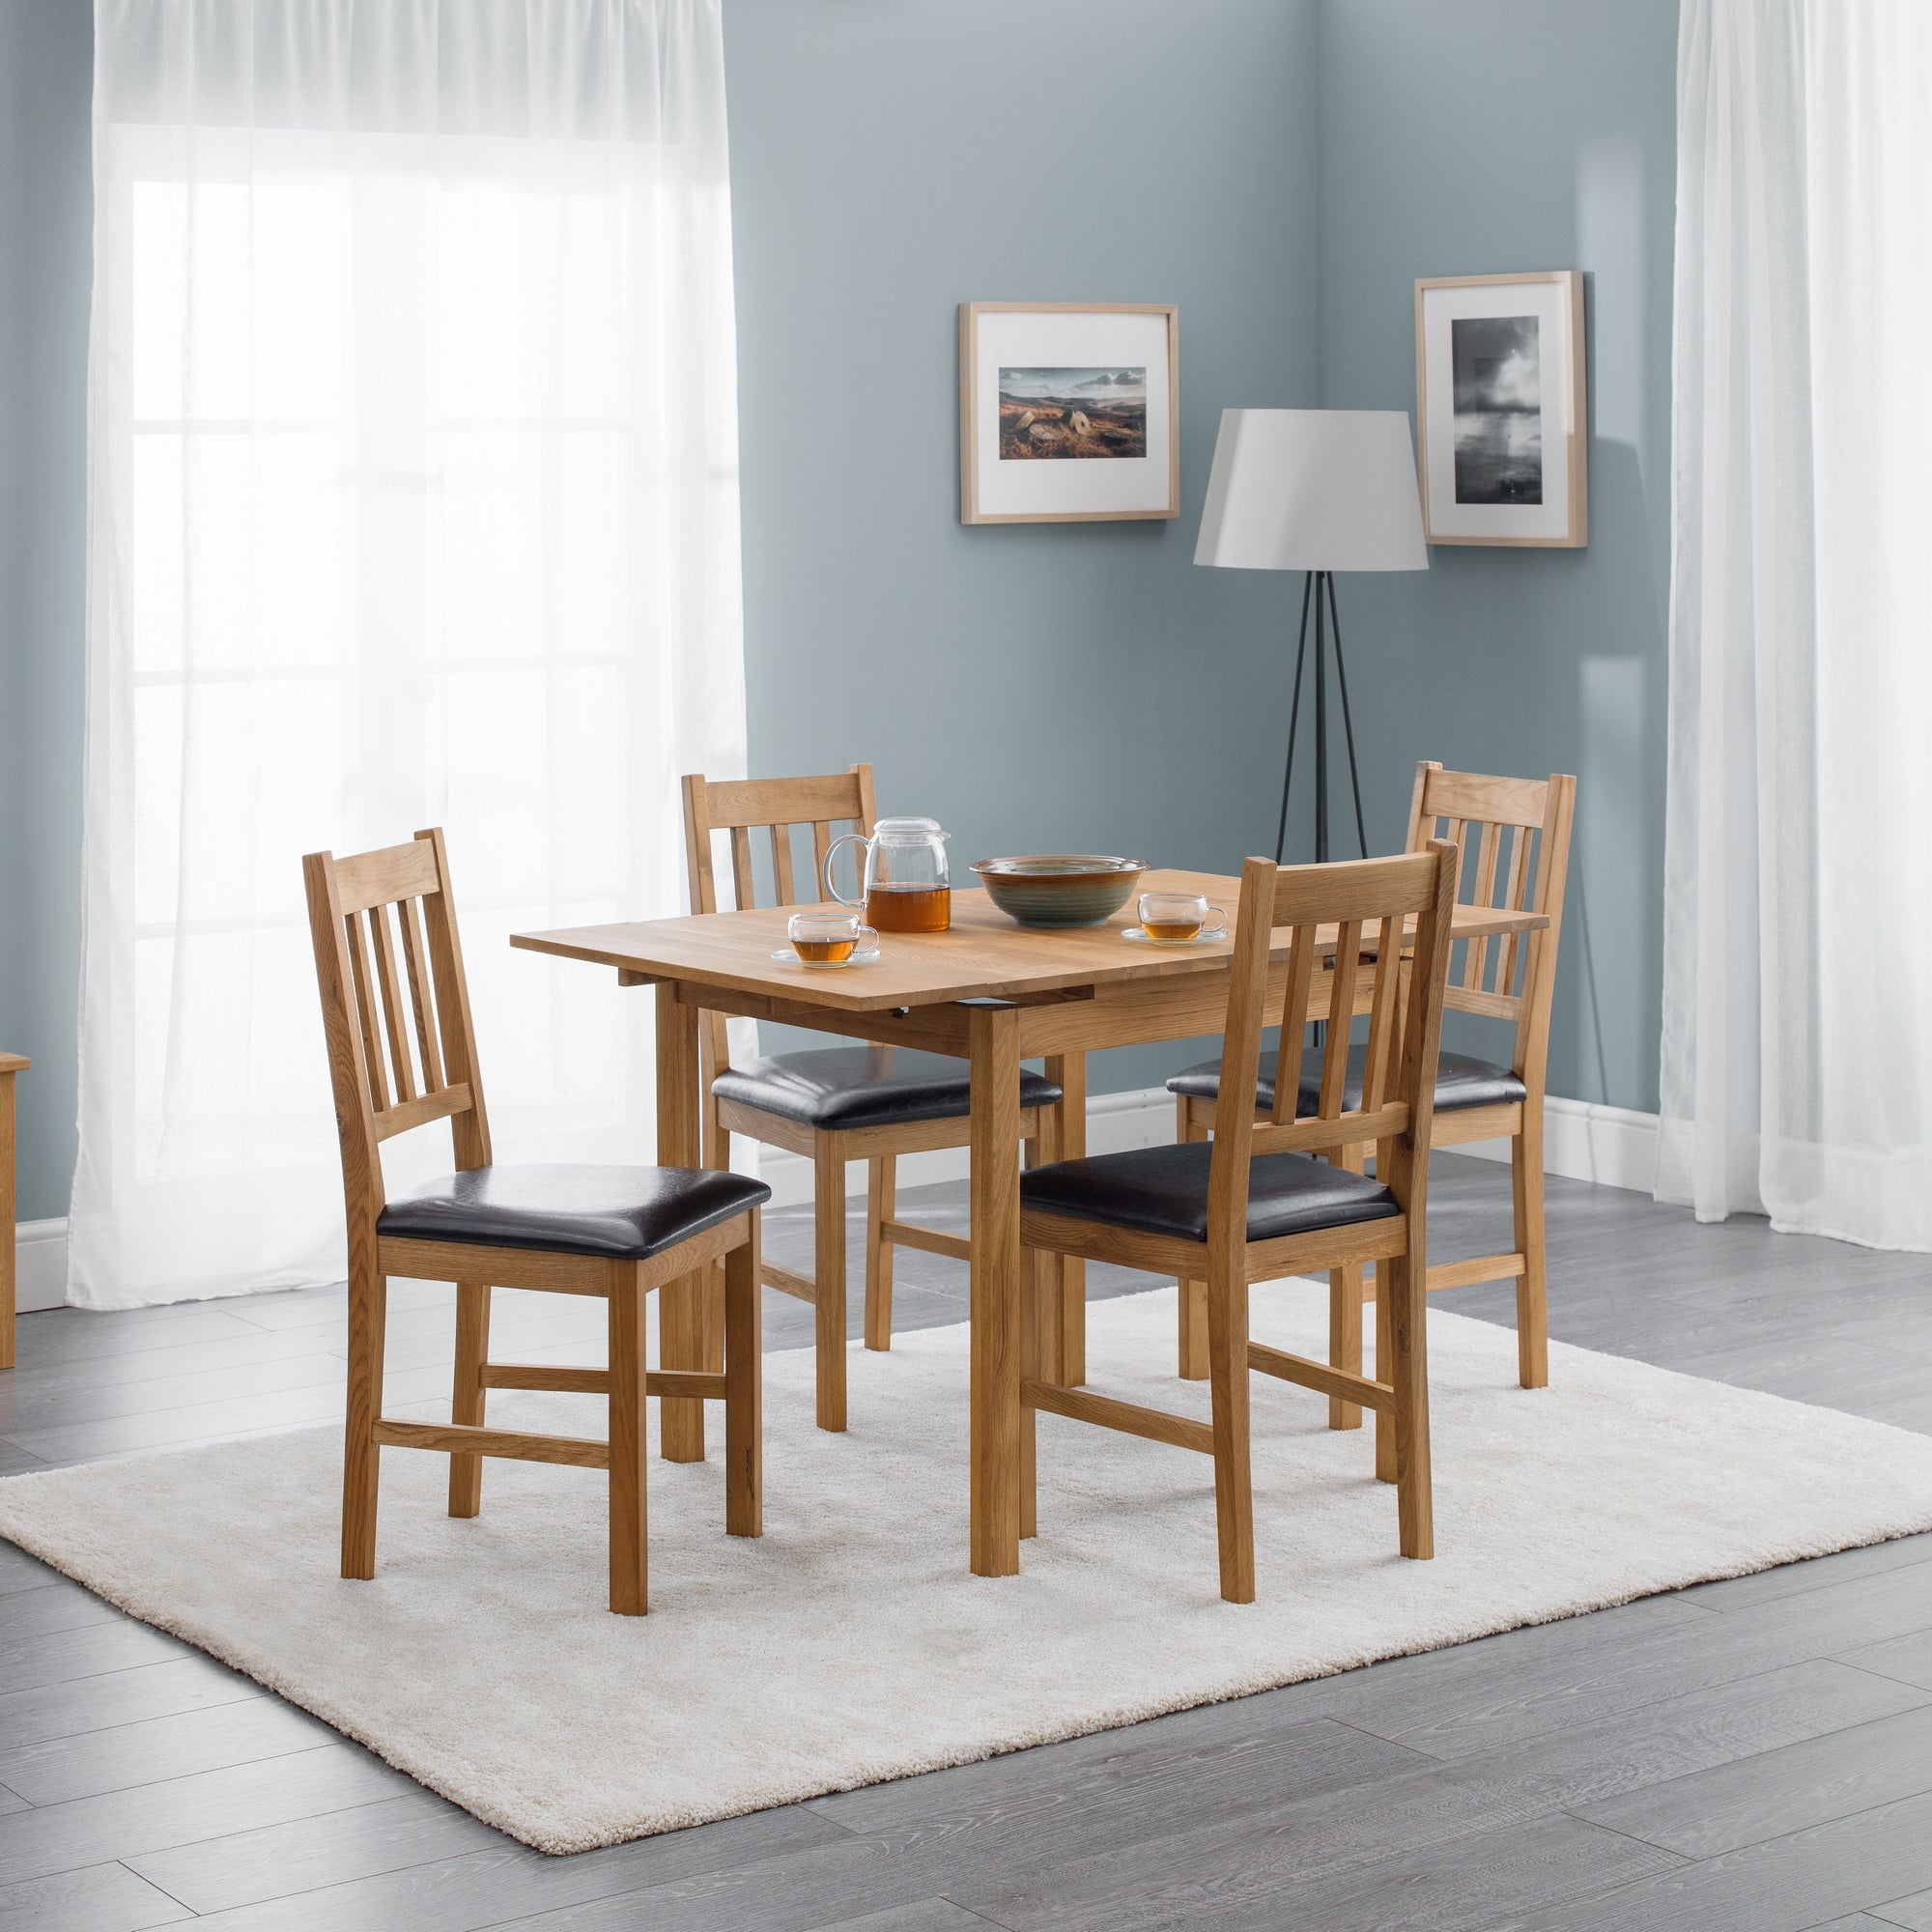 Coxmoor 4-6 Seater Square Extendable Dining Table, Solid Oak